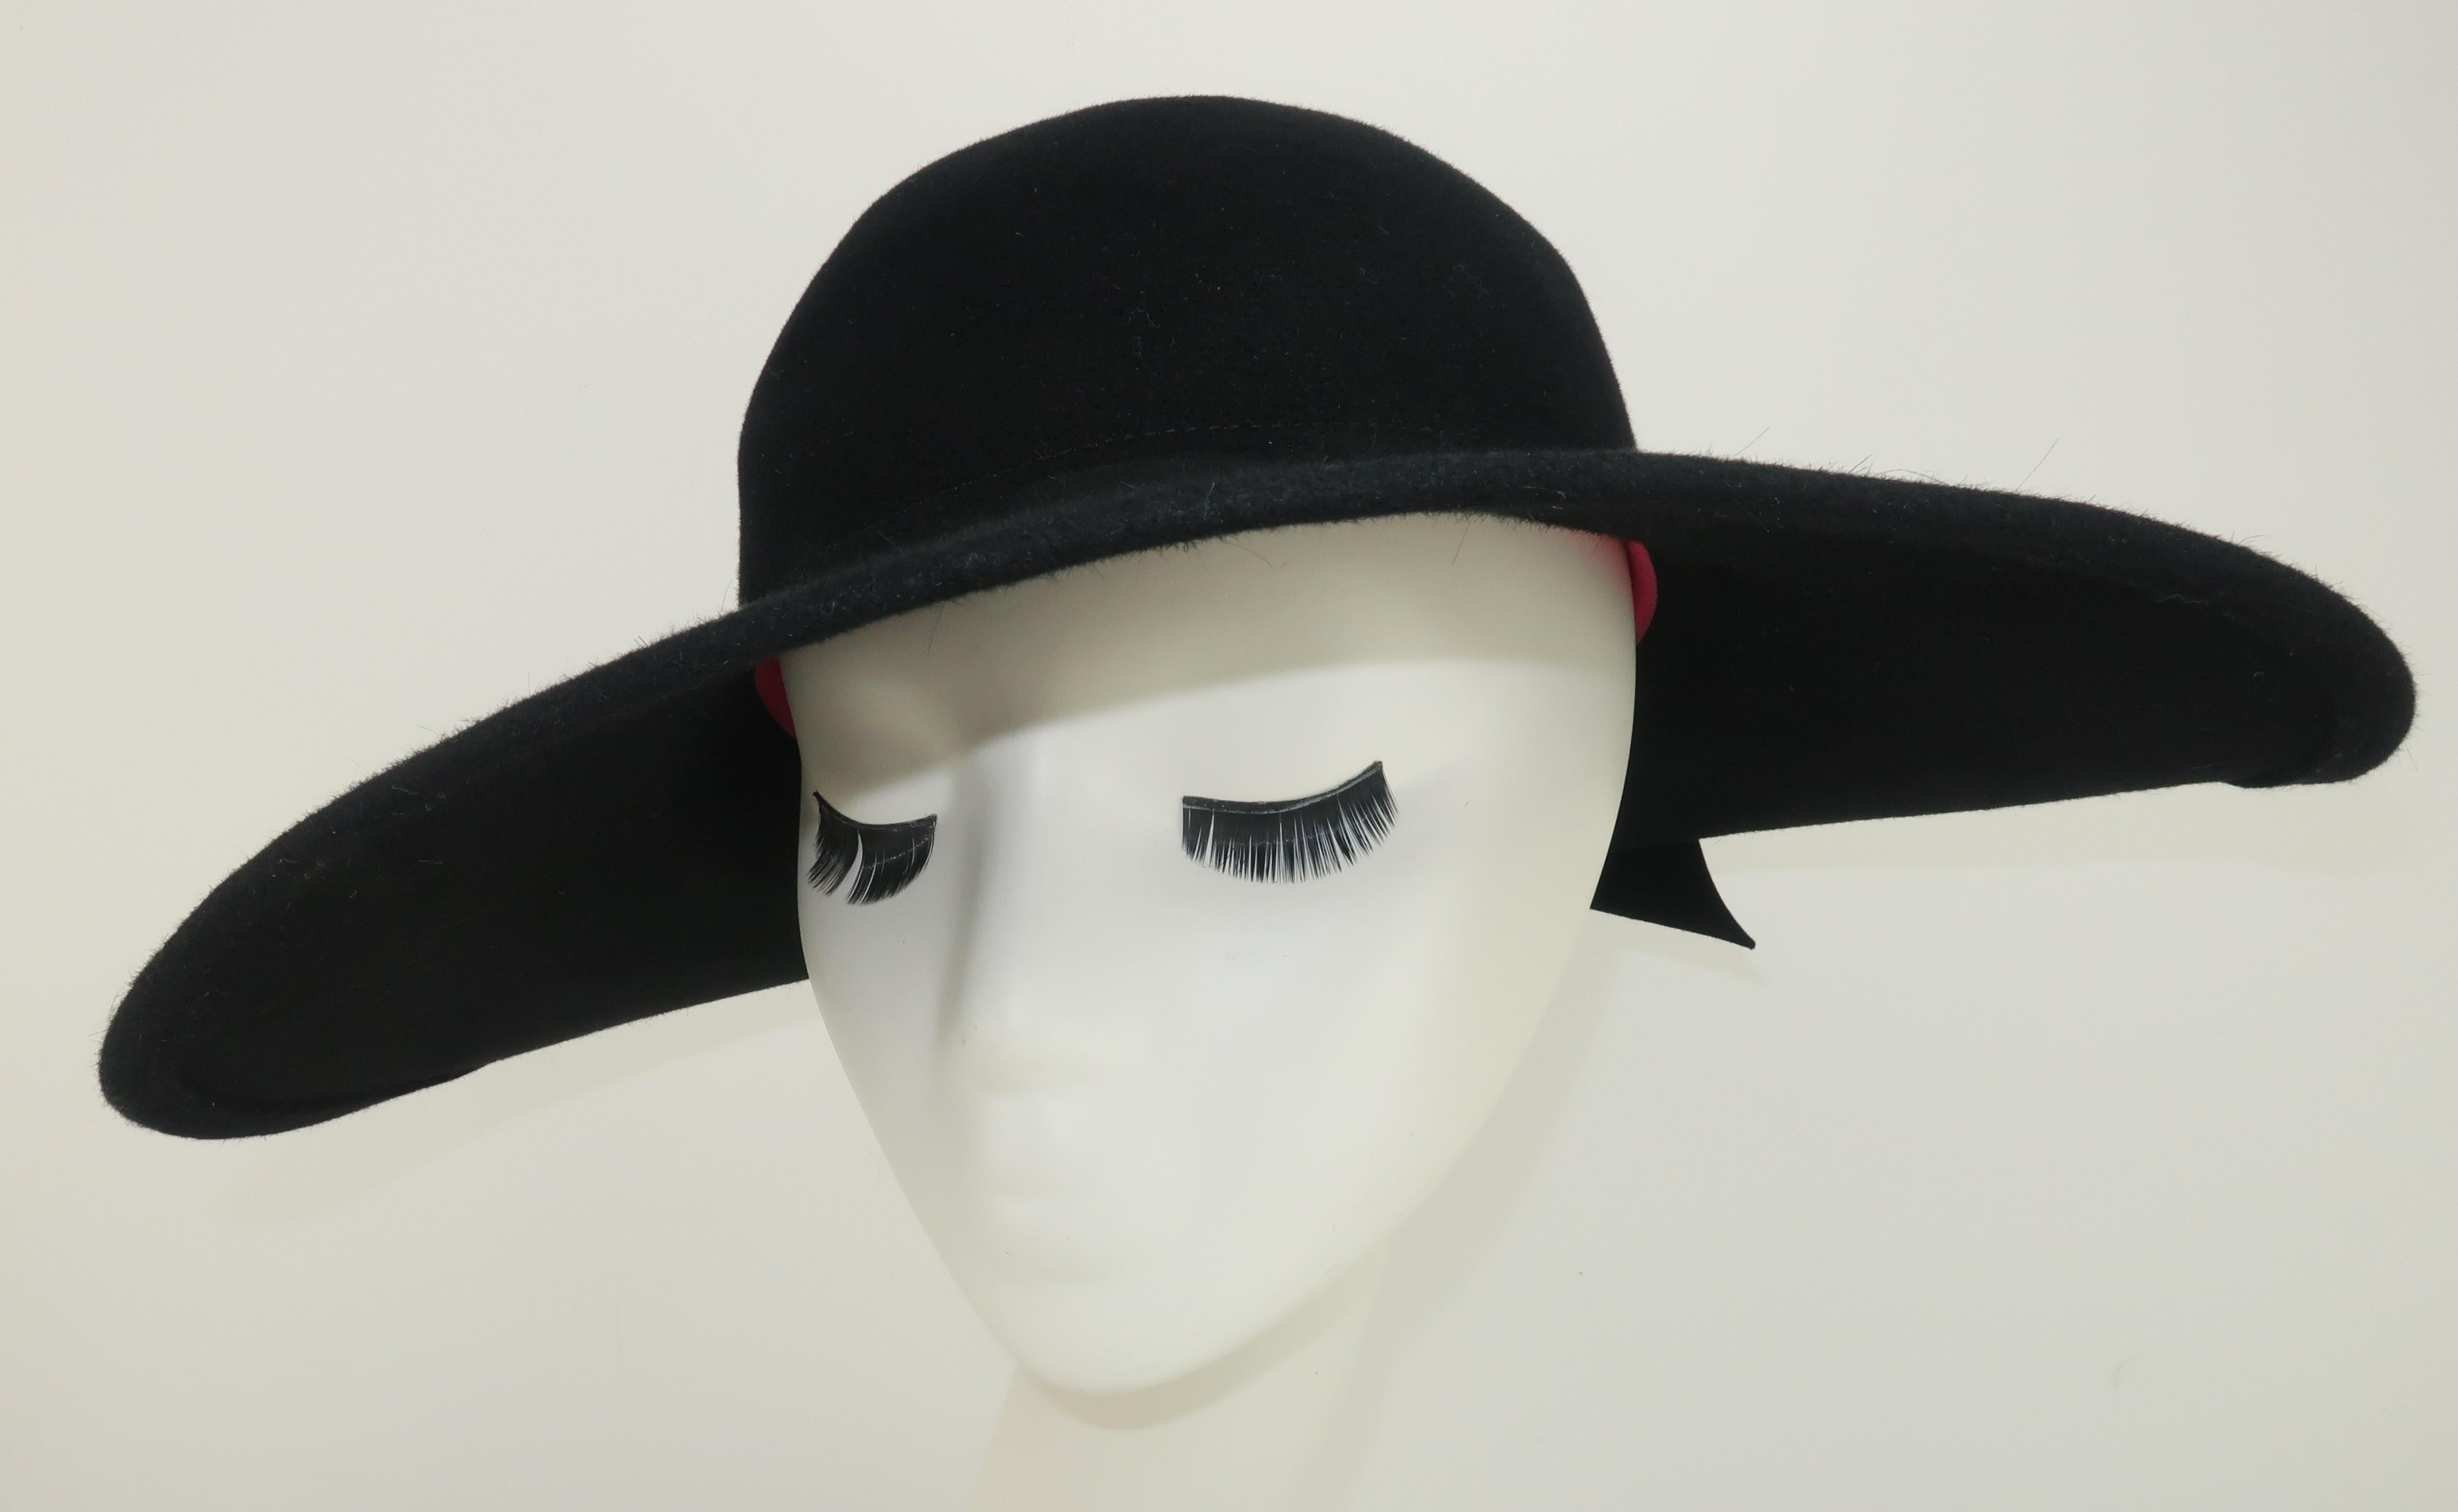 1980's Frank Olive black wool felt hat with a wide brim at the front tapering to an upturn at the back adorned by a felted bow.  Inside rim is lined with a hot pink grosgrain ribbon.  Reminiscent of 1920's styles but with a chic modern